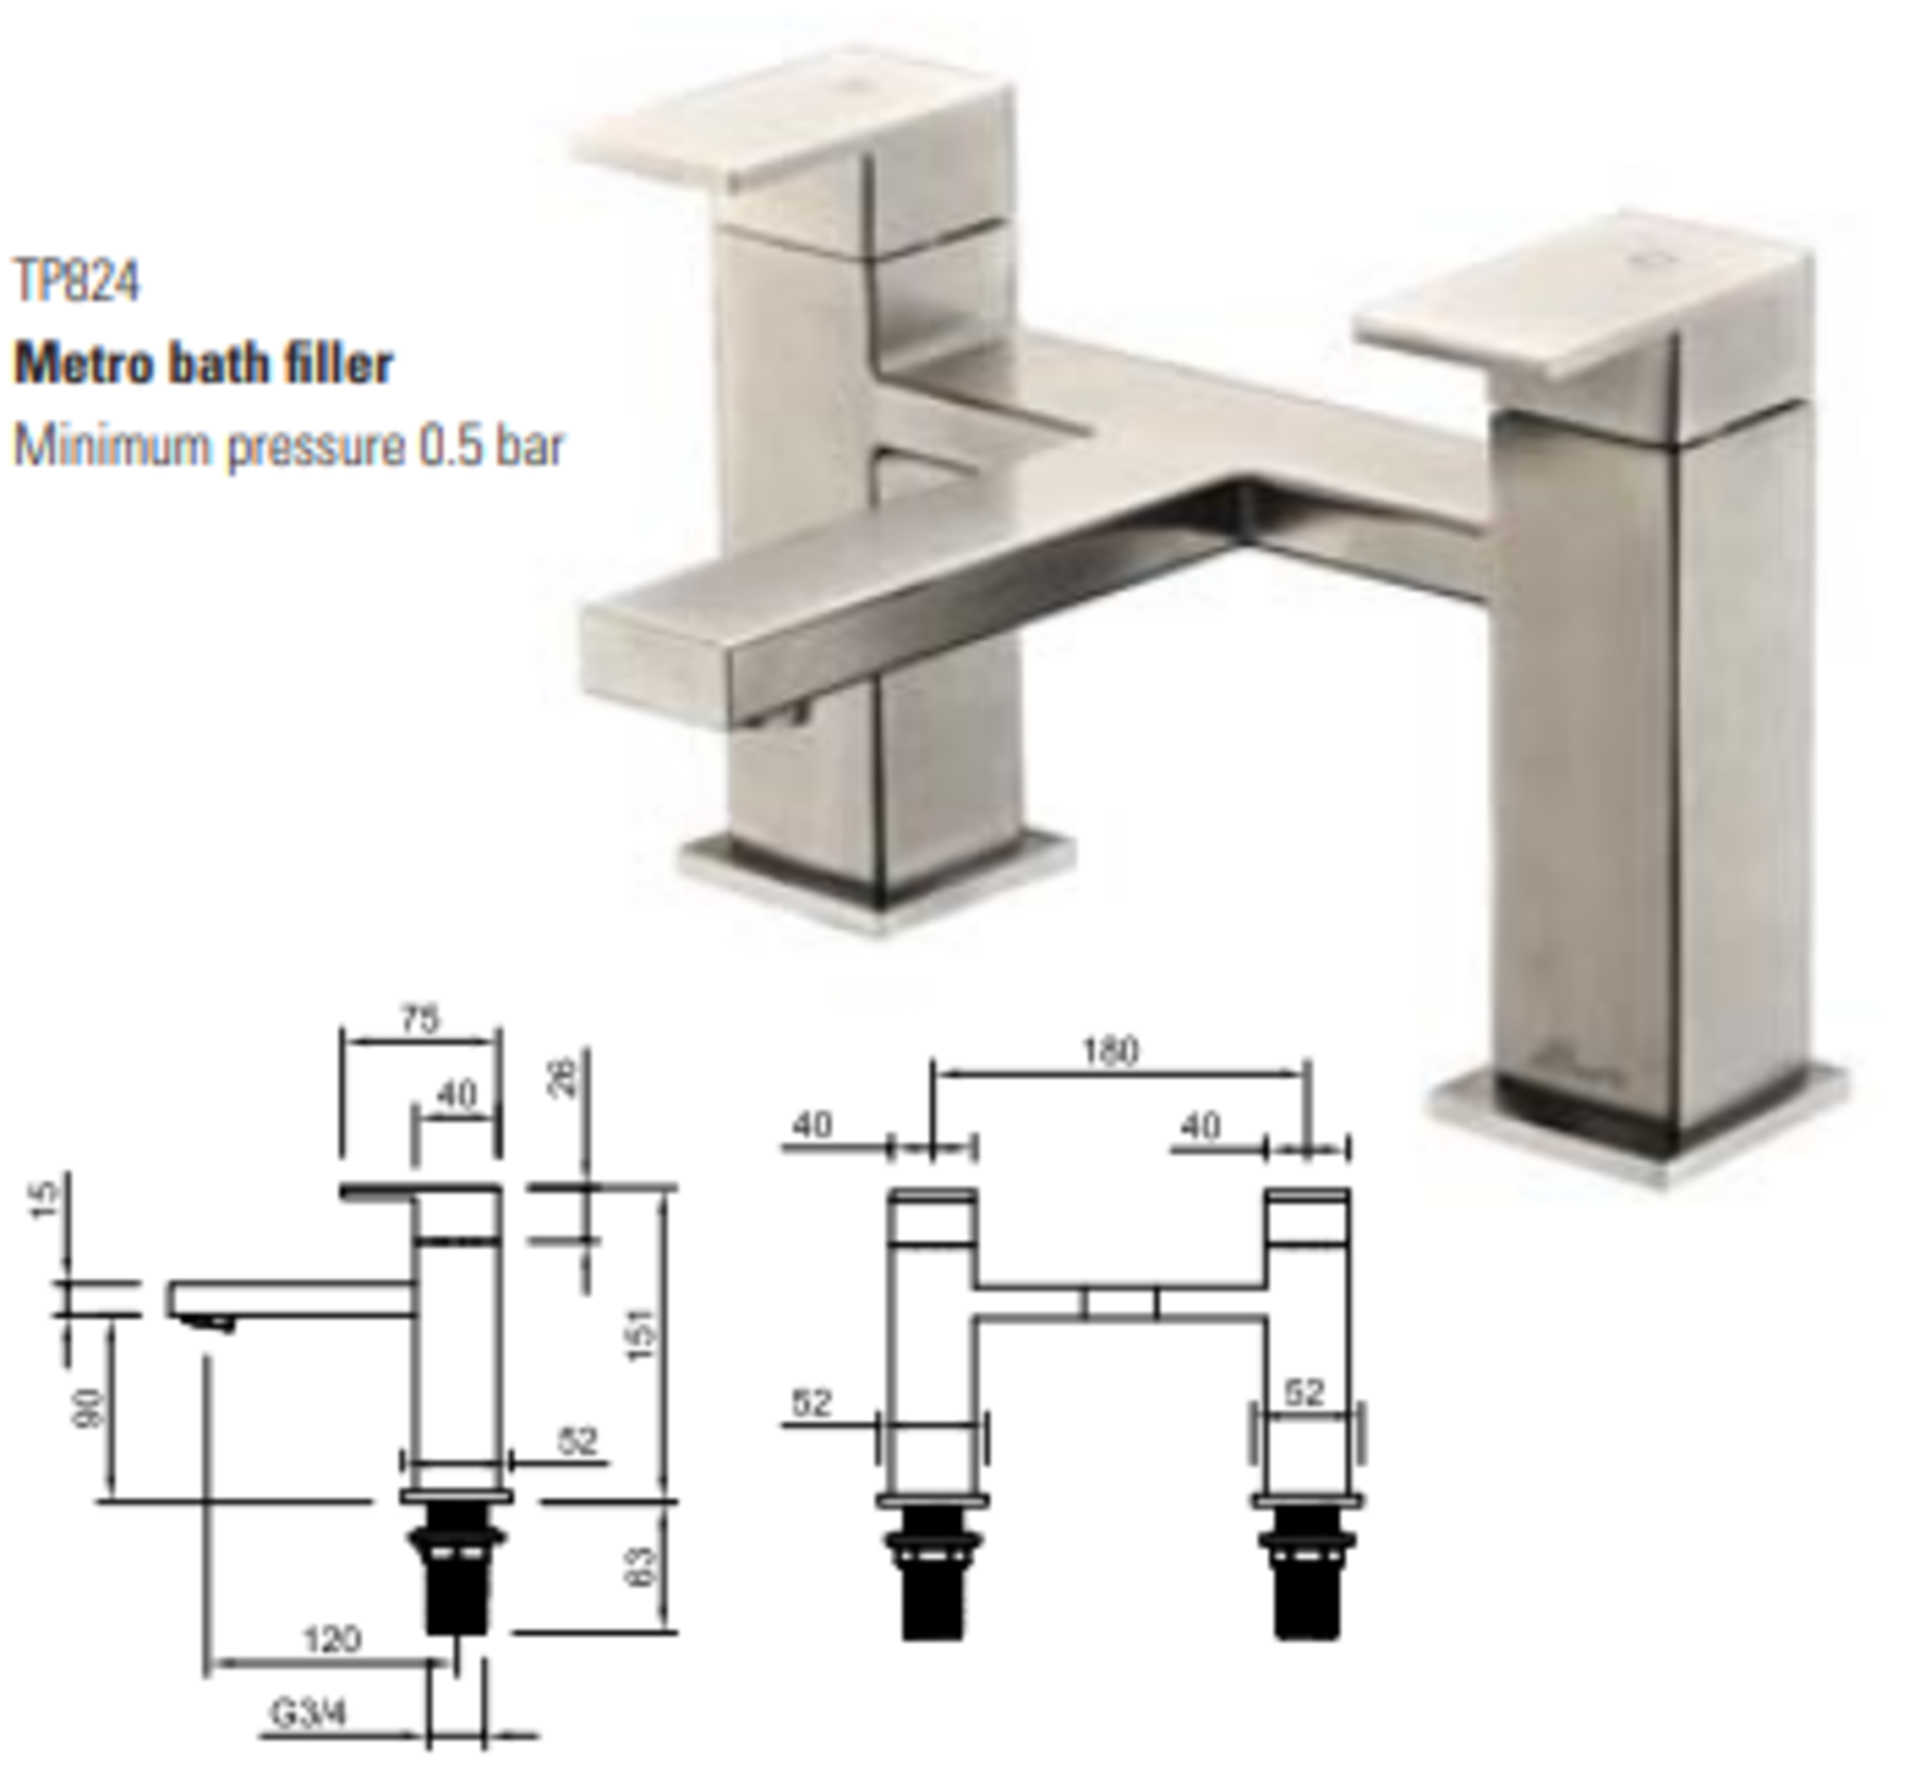 1 x Stonearth 'Metro' Stainless Steel Bath Filler Mixer Tap - Brand New & Boxed - RRP £340 - Ref: